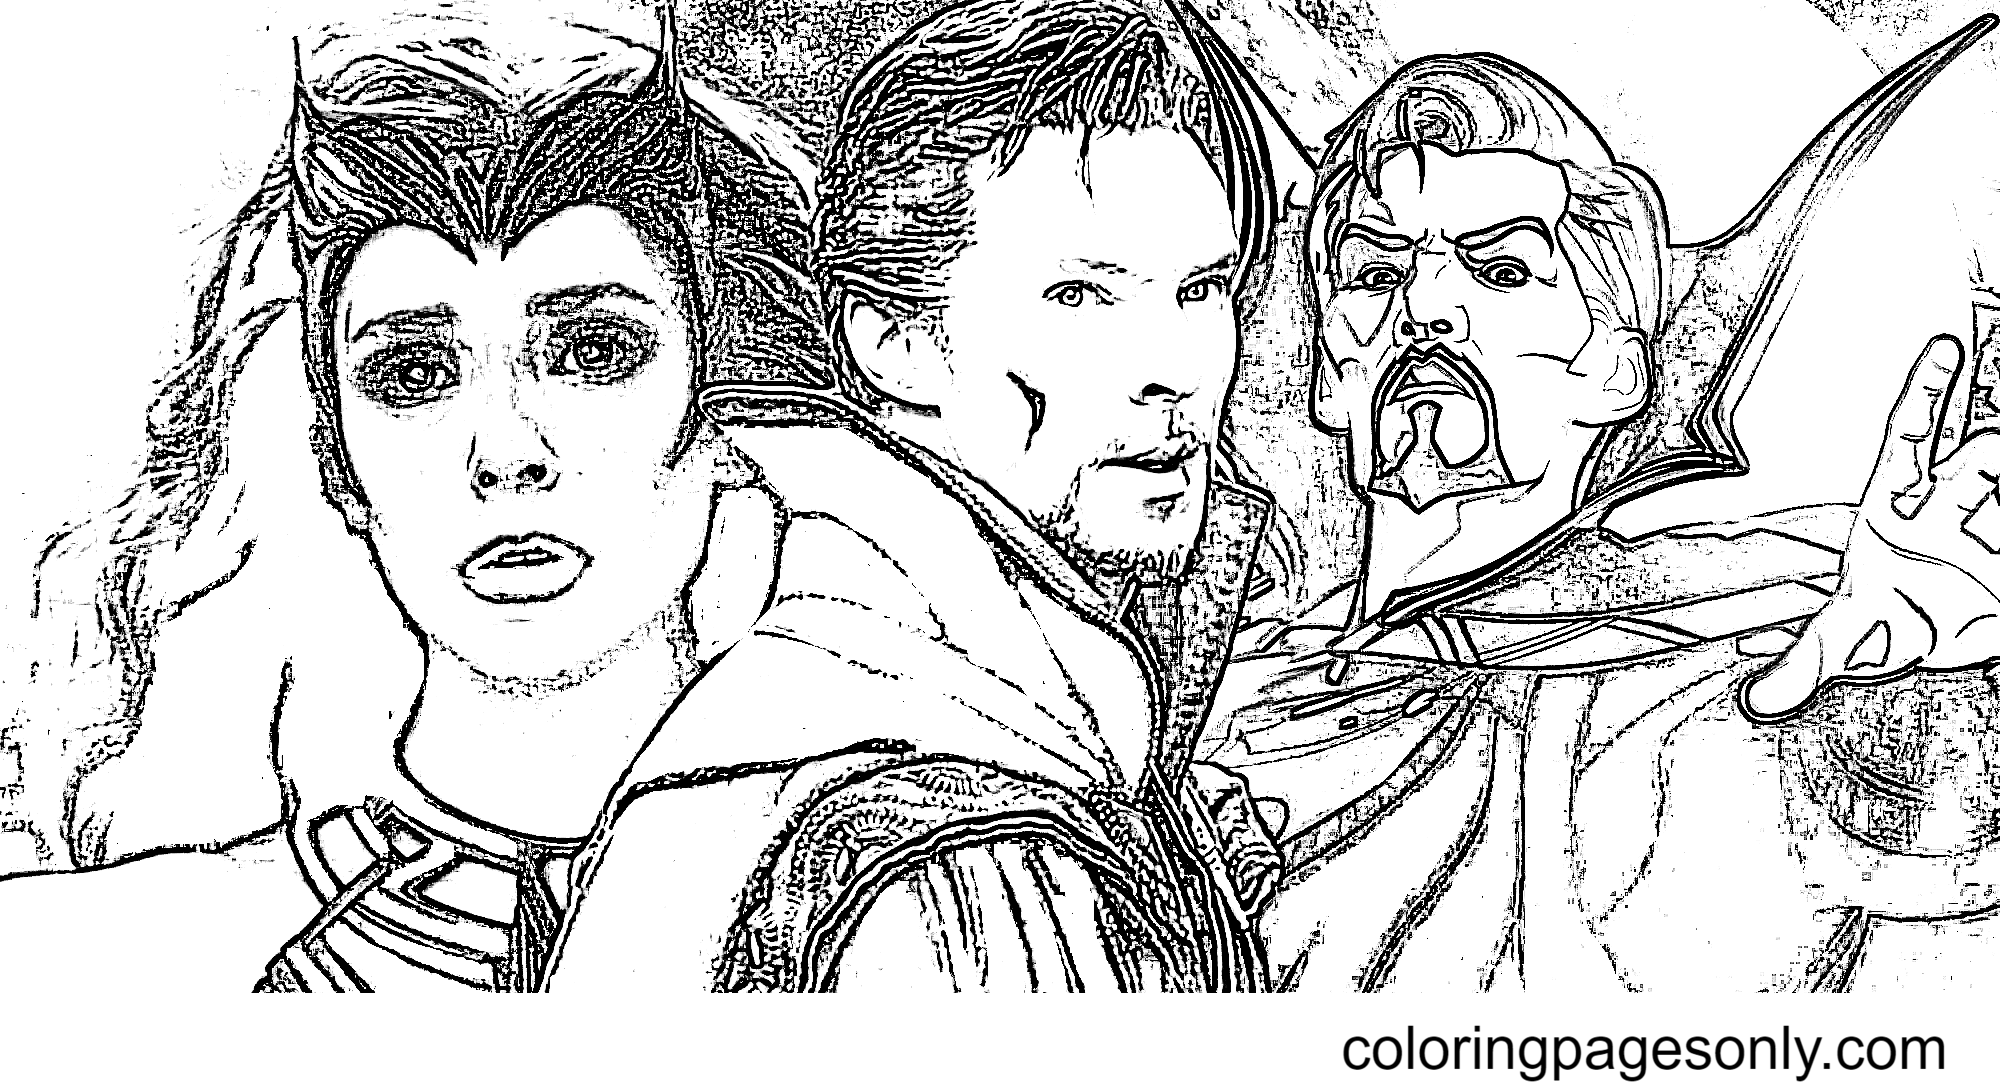 Doctor Strange with Scarlet Witch Coloring Page